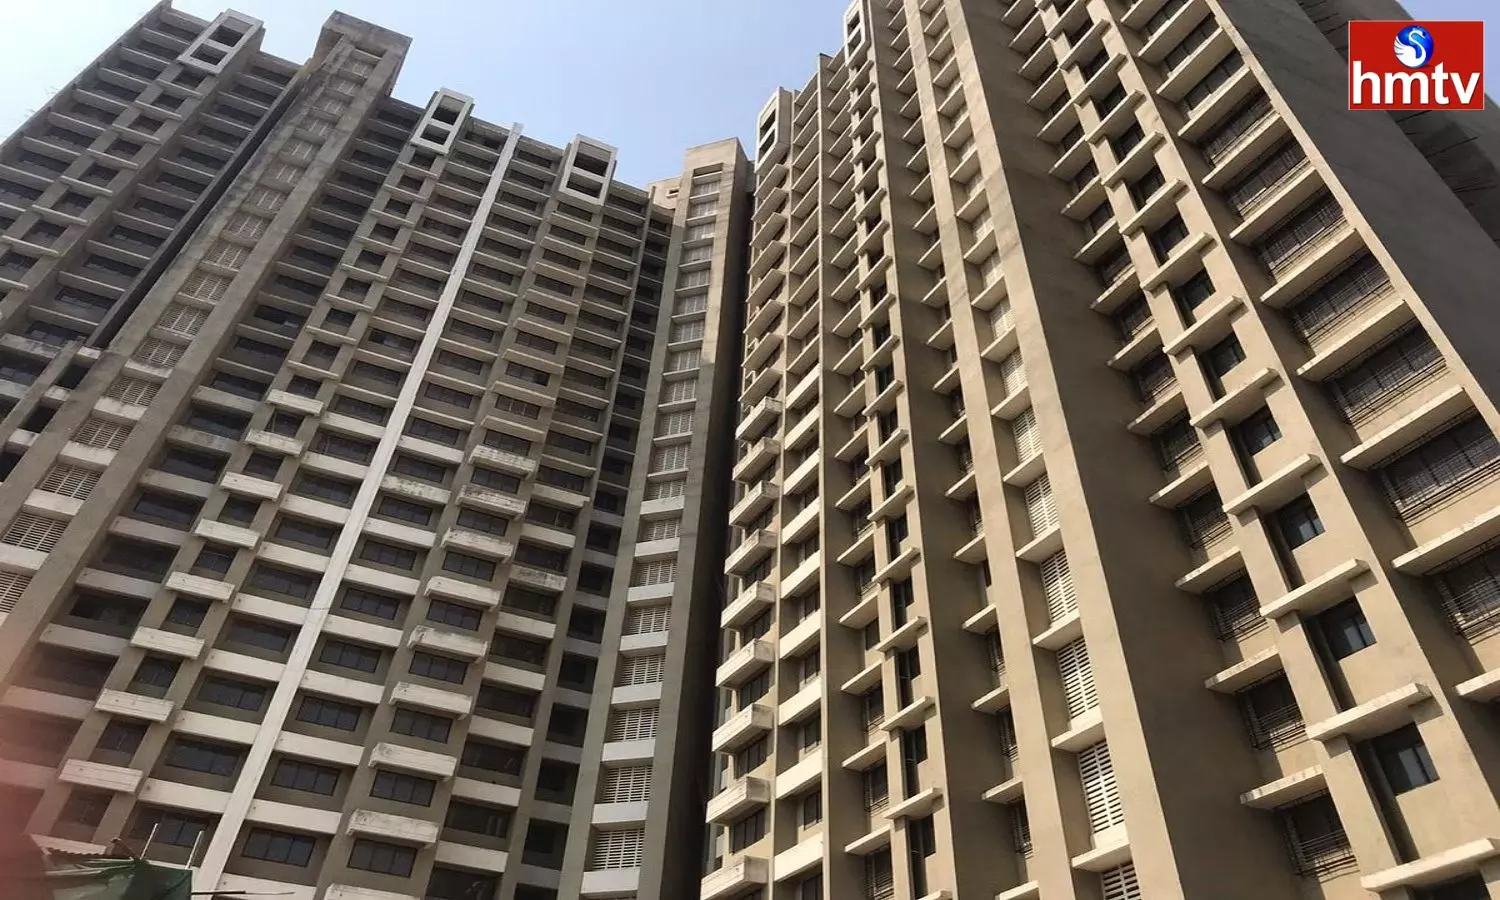 Maharashtra Housing and Area Development Authority announced a lottery scheme to sale affordable homes between Rs 9-49 lakh near Mumbai